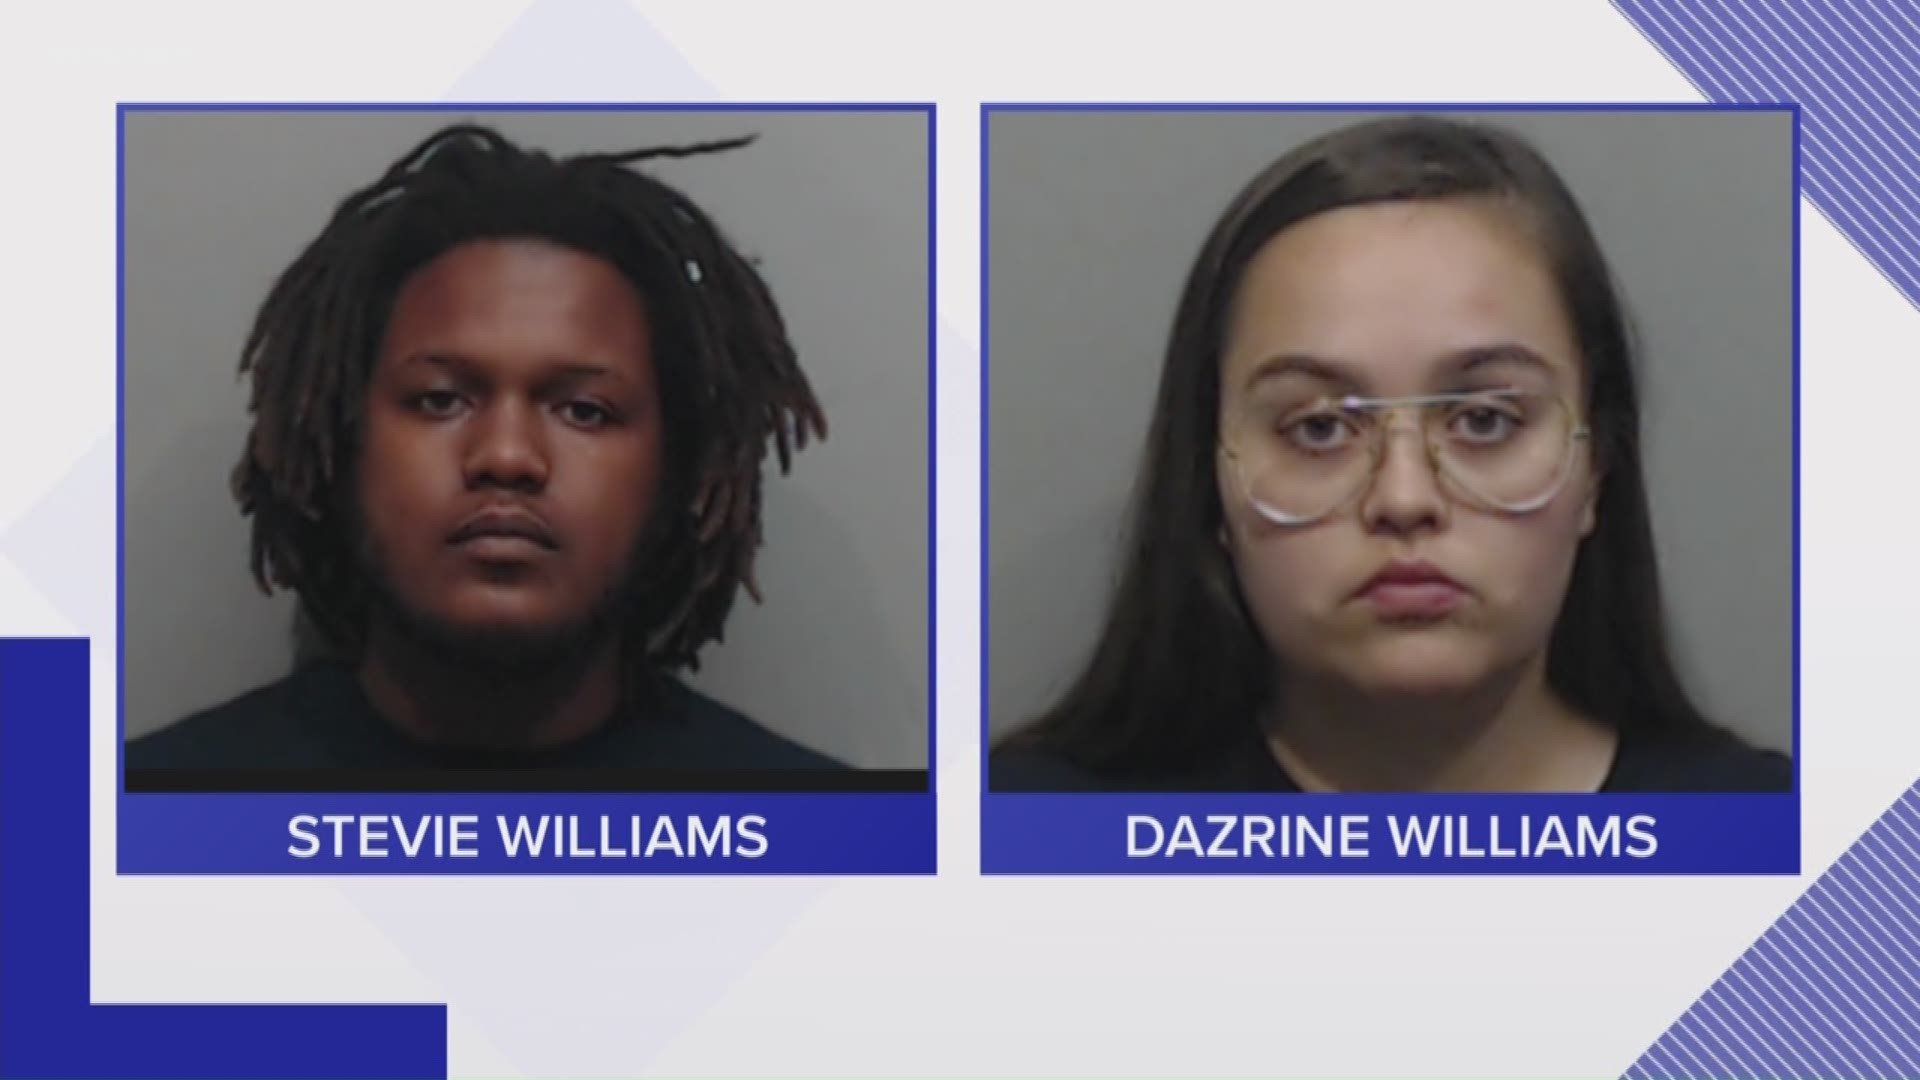 The parents of a 21-month-old who died on July 4, 2018, in Kyle have been arrested after police say they may have caused the child's death and blamed it on "demons."